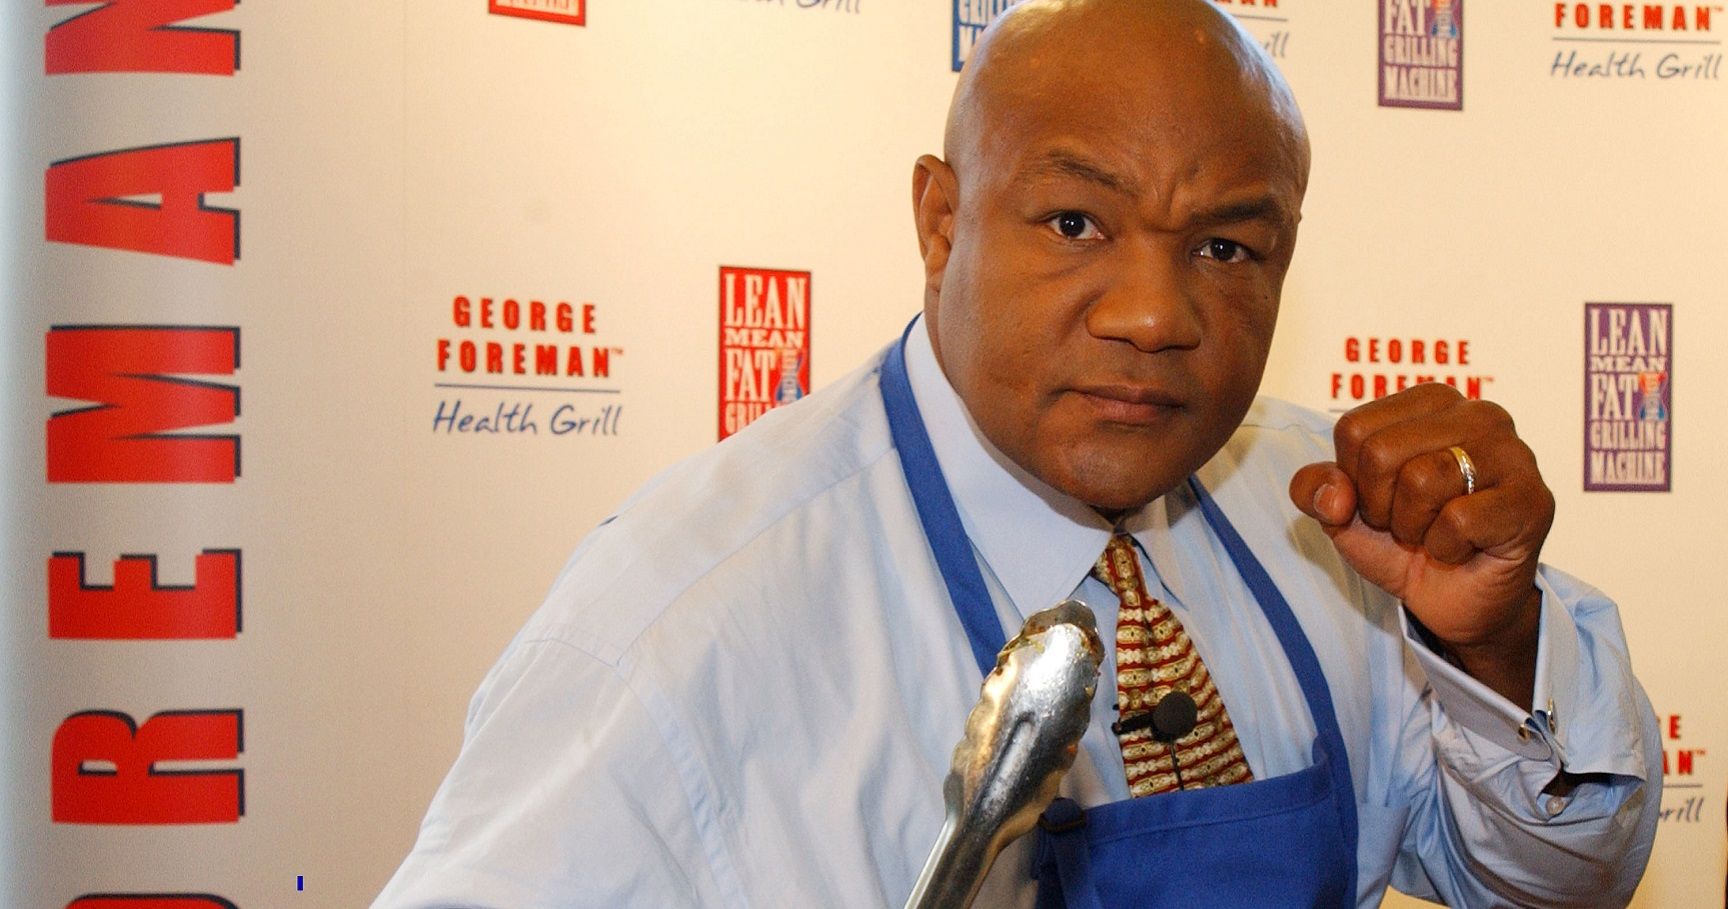 George Foreman Launhces New Grill in London